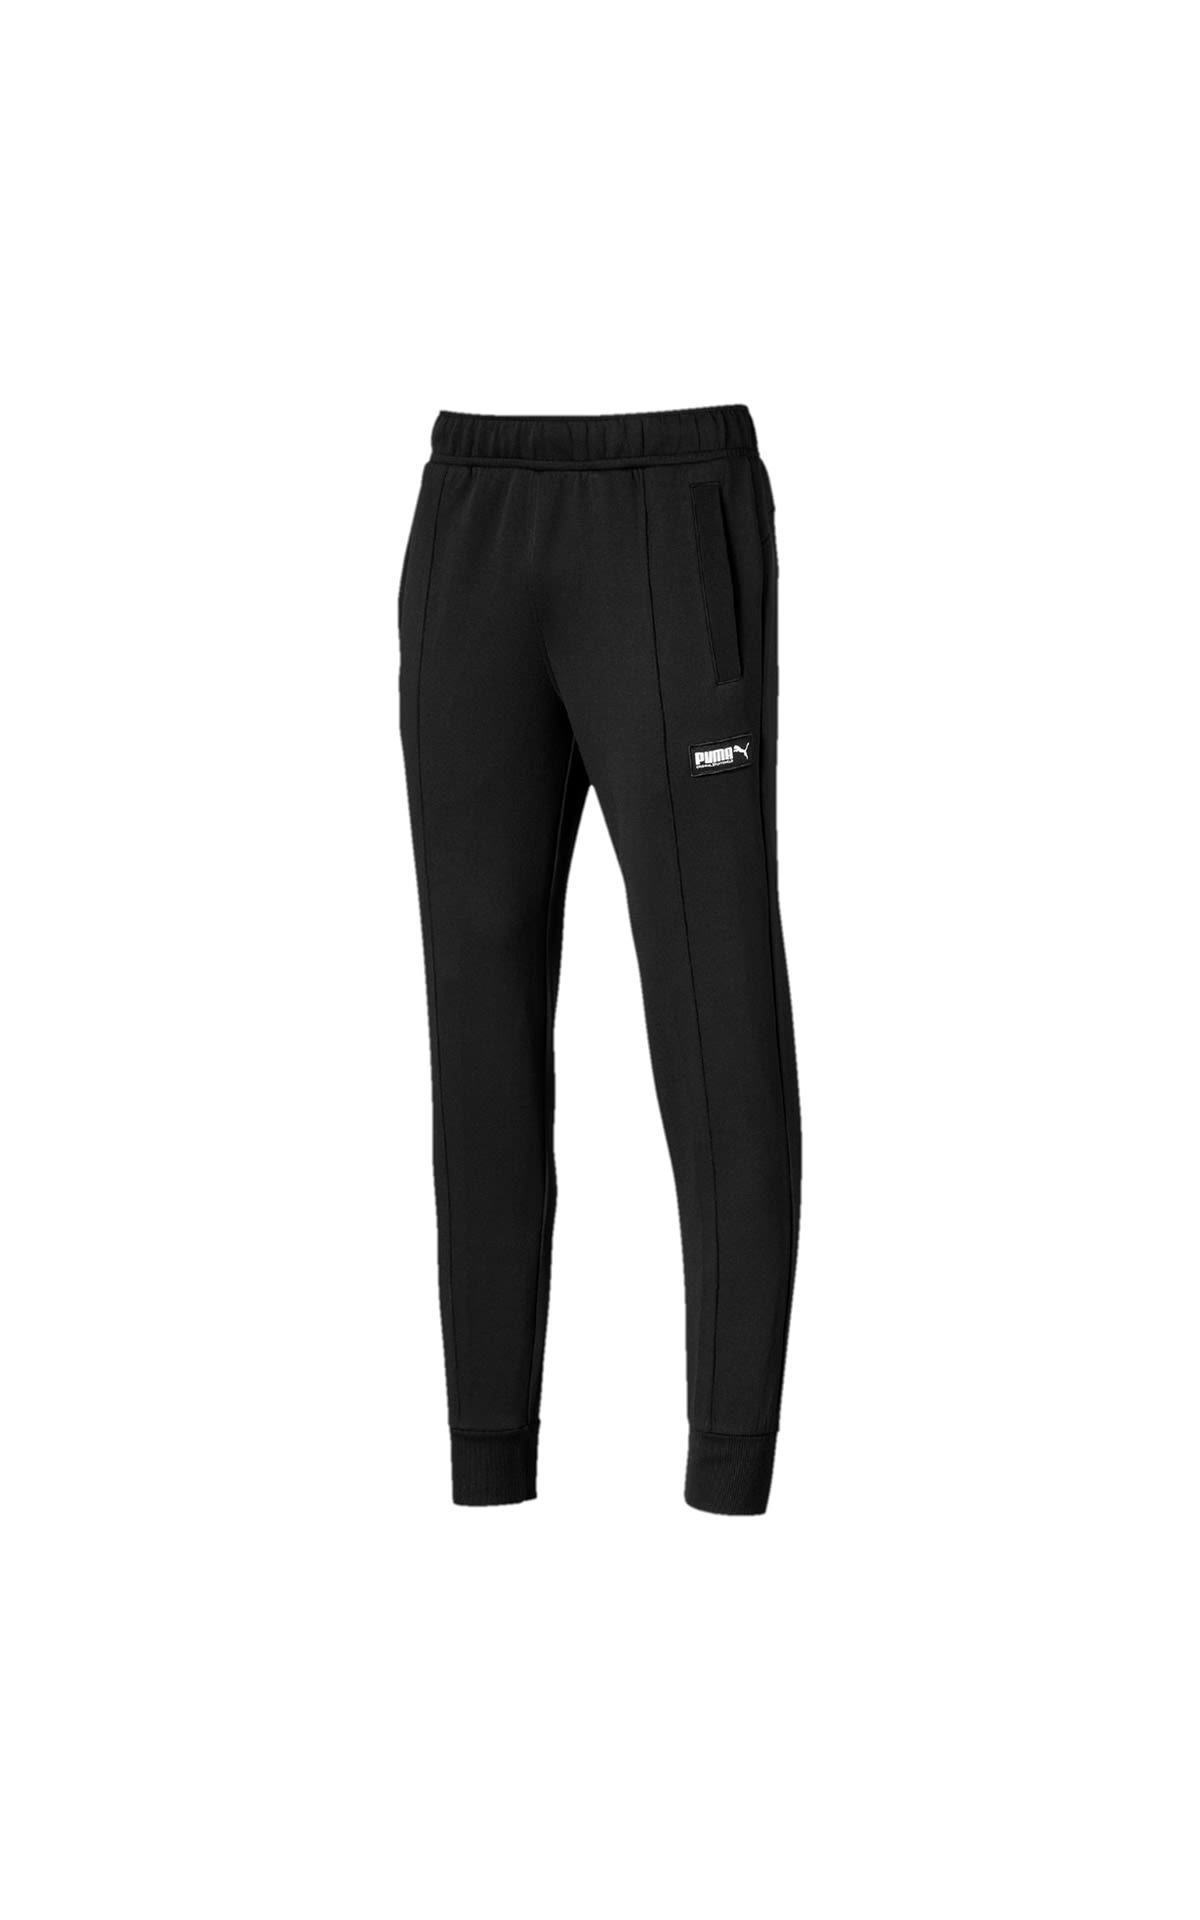 PUMA fusion pants at The Bicester Village Shopping Collection